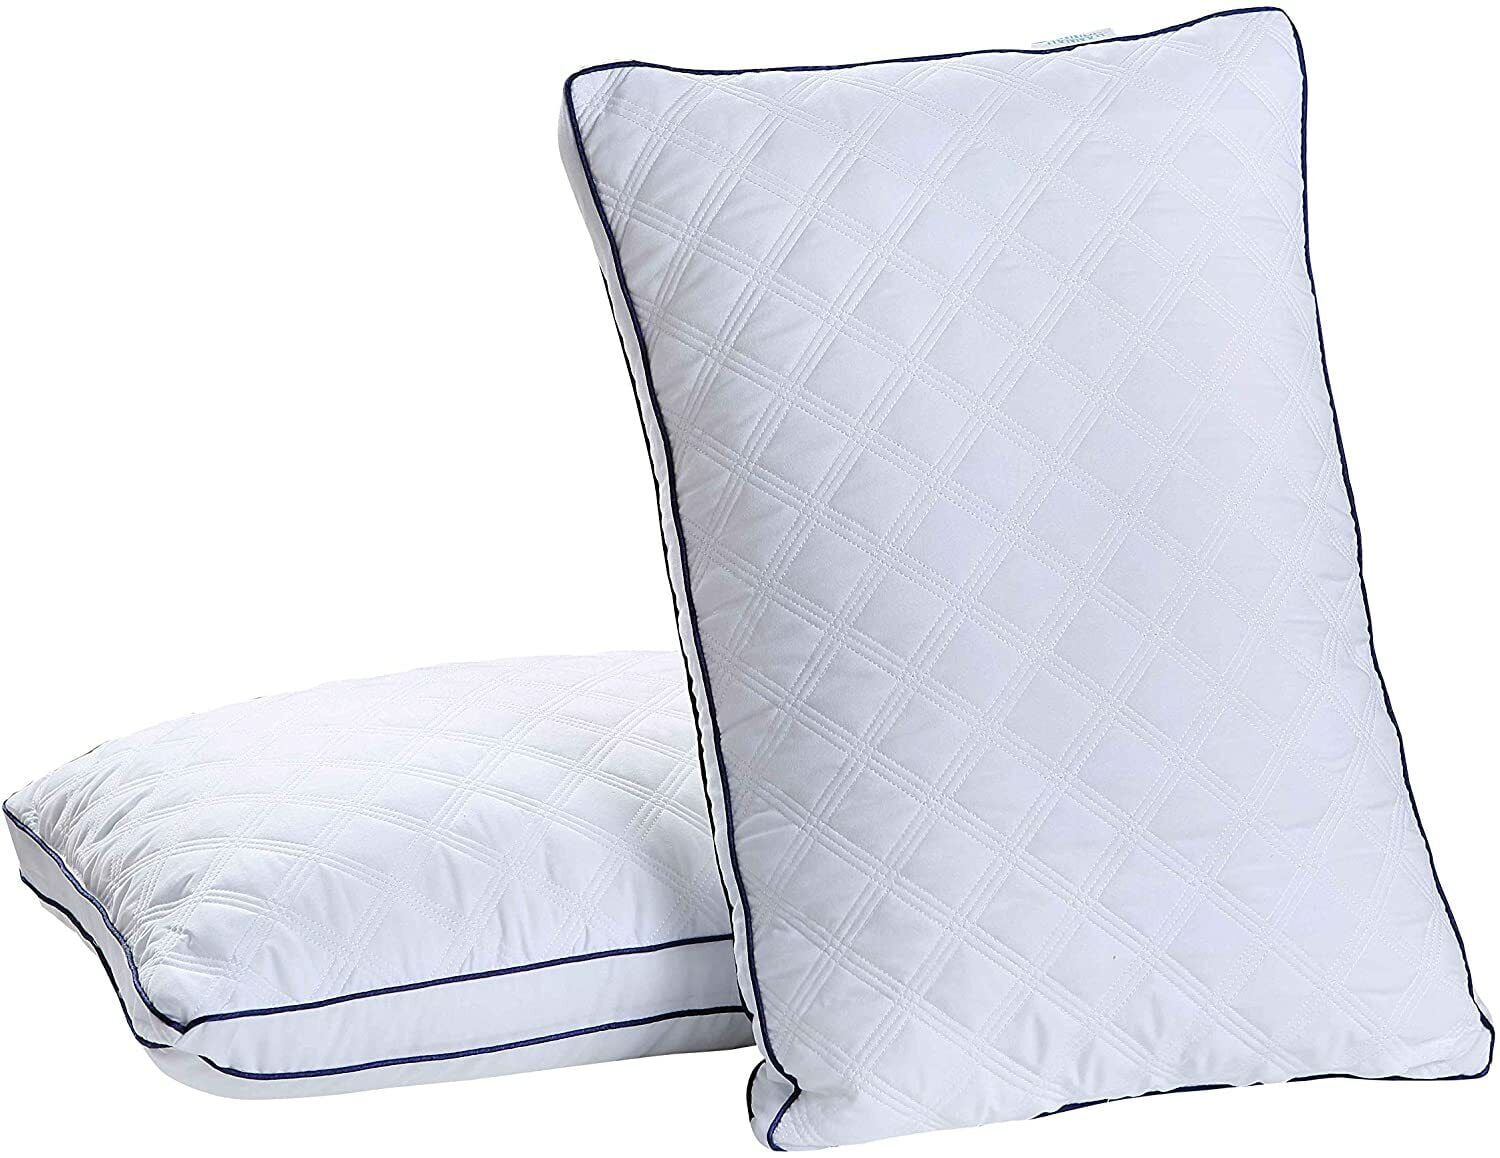 salami plan voorzien Bed Pillows Set of 2 Gusseted Neck Support Soft Pillow For Side & Back  Sleepers - Walmart.com